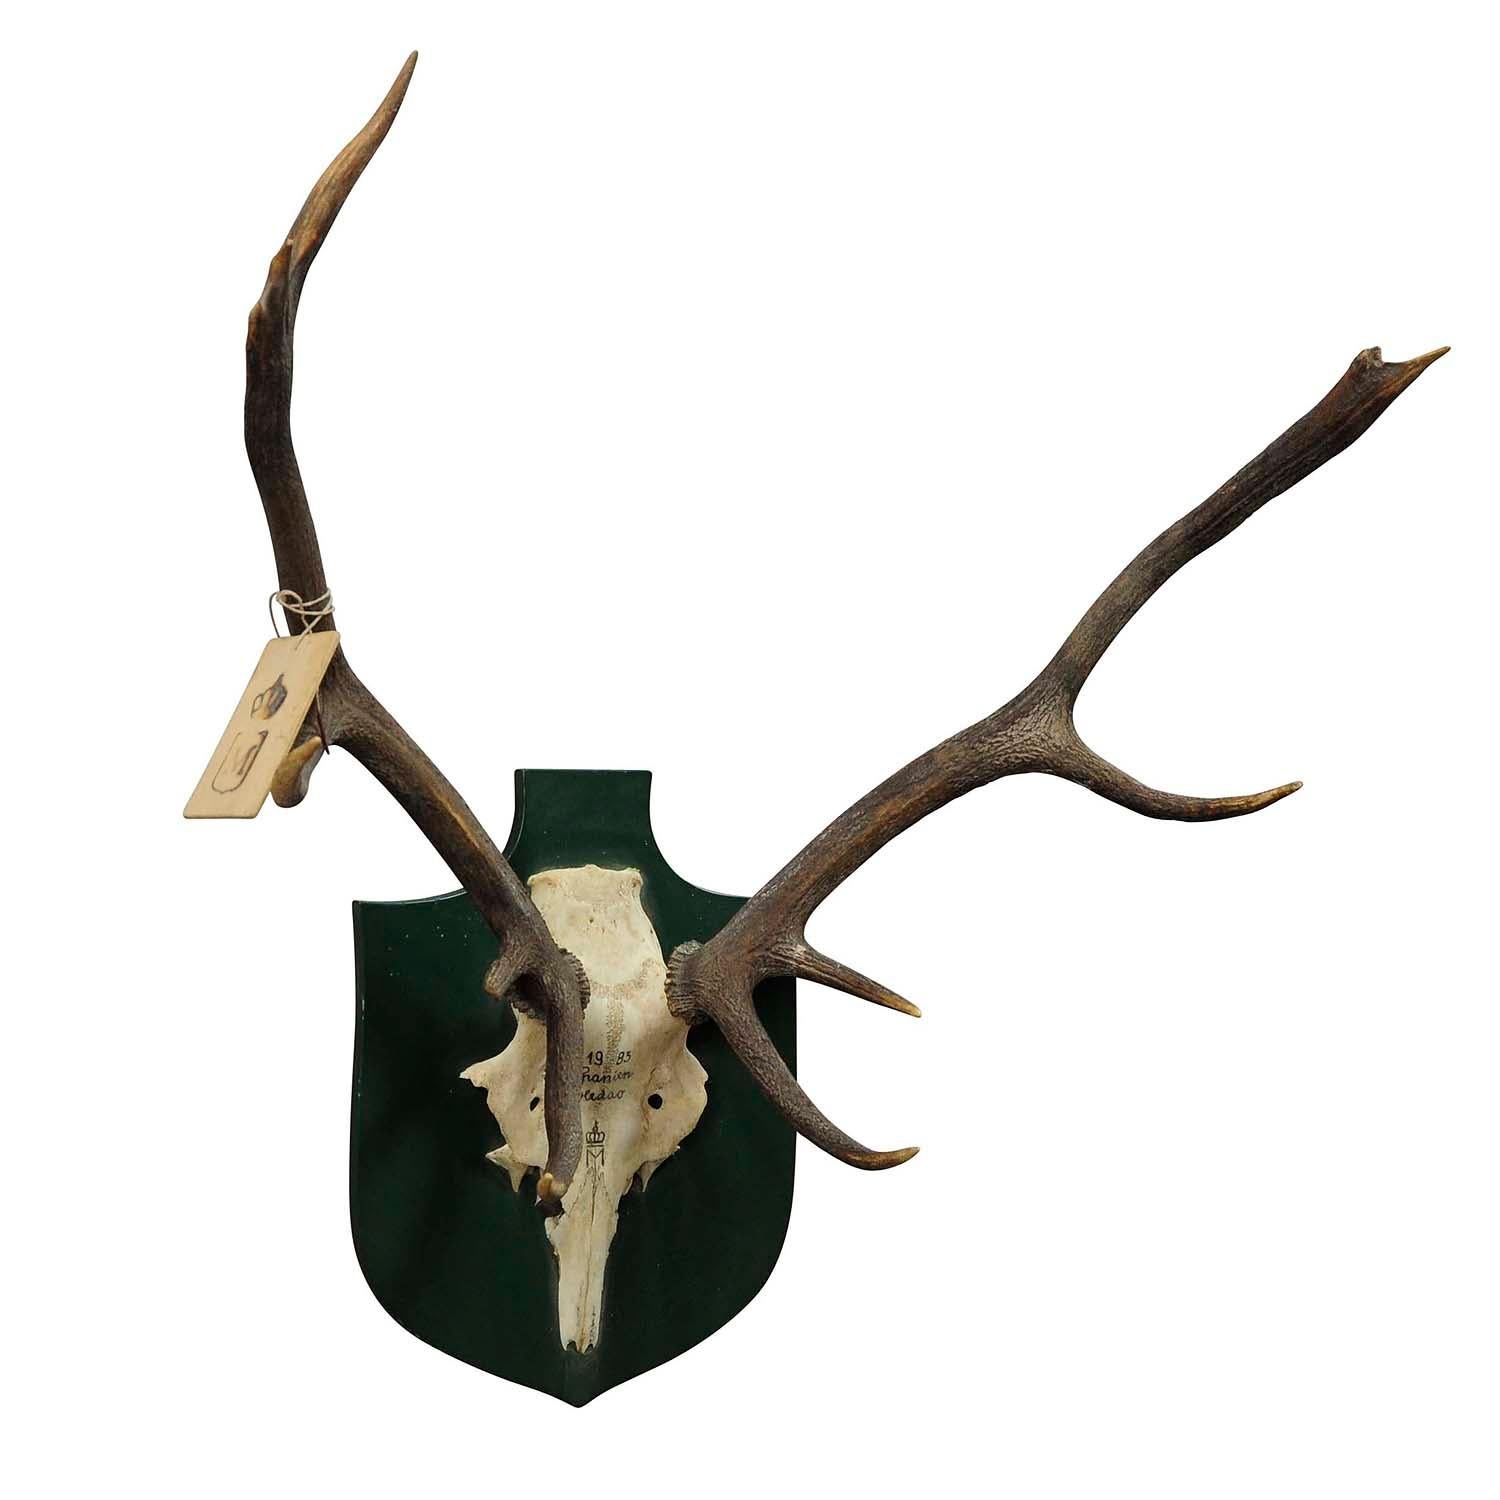 Vintage Deer Trophy Spain Toledao 1983 uneven Twelve Ends

A great uneven 12 pointer Black Forest deer (Cervus elaphus) trophy from the palace of Salem in South Germany. It was shot by a member of the lordly family of Baden in 1983. It is mounted on